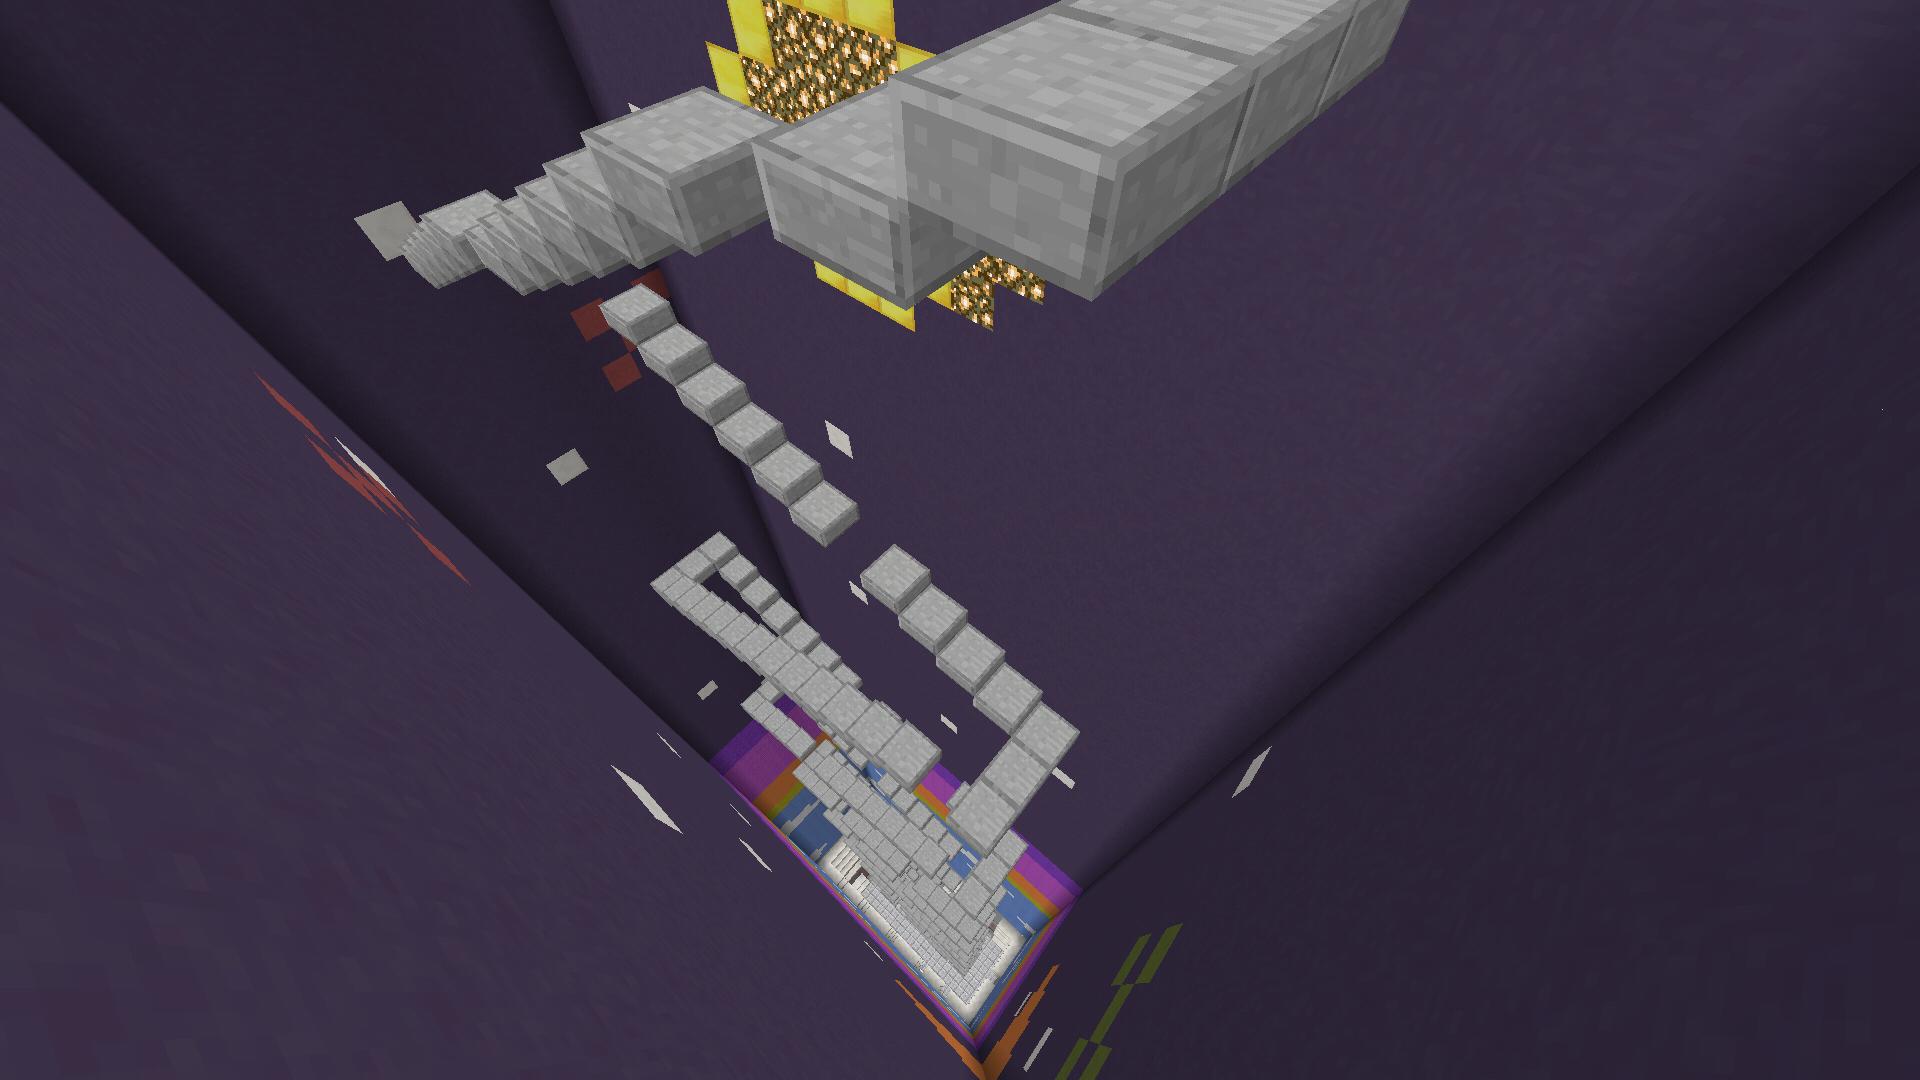 Infinite Stairs Minecraft map APK pour Android Télécharger